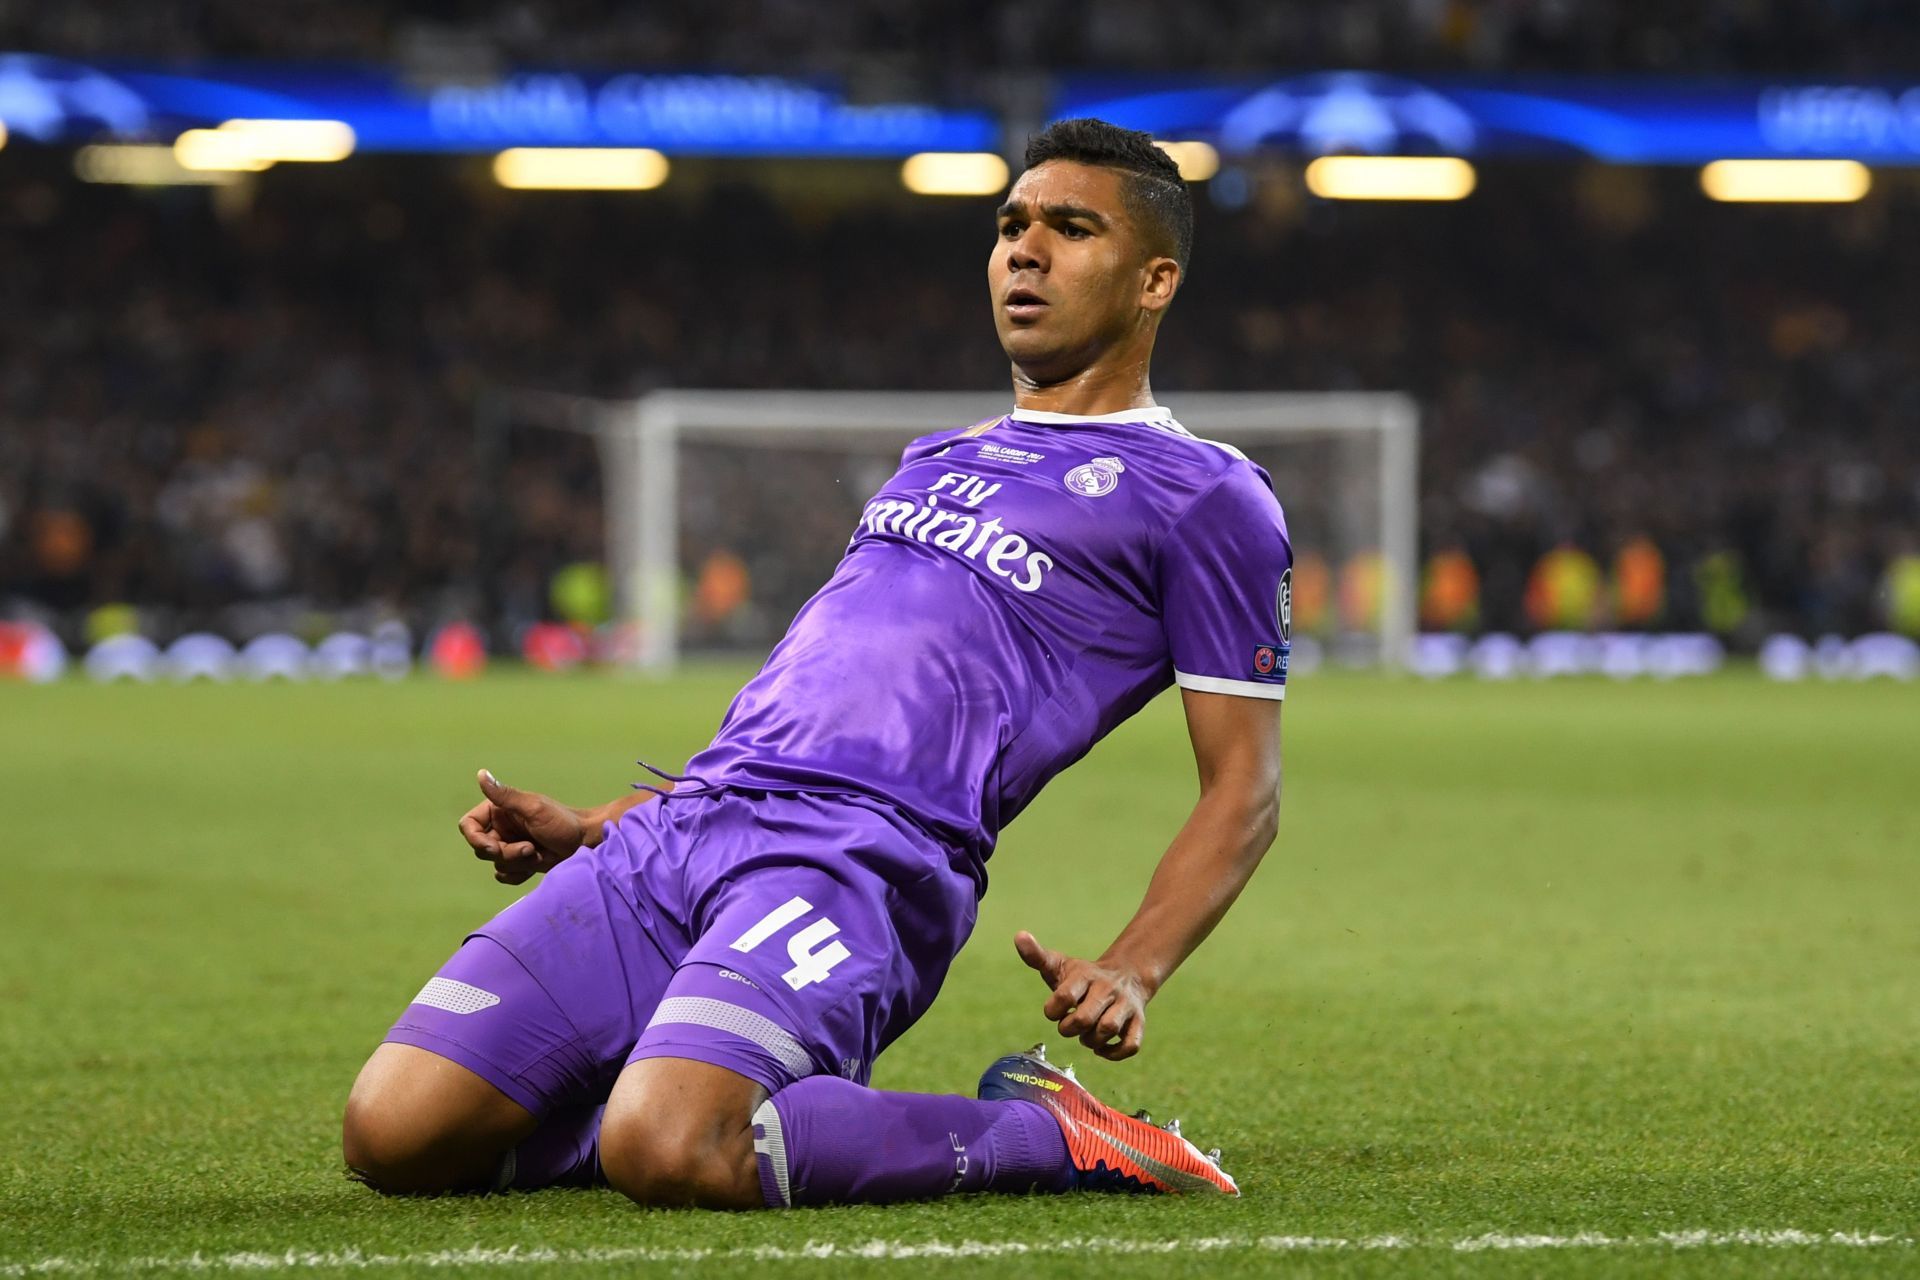 Casemiro will have to help out his defenders against Chelsea